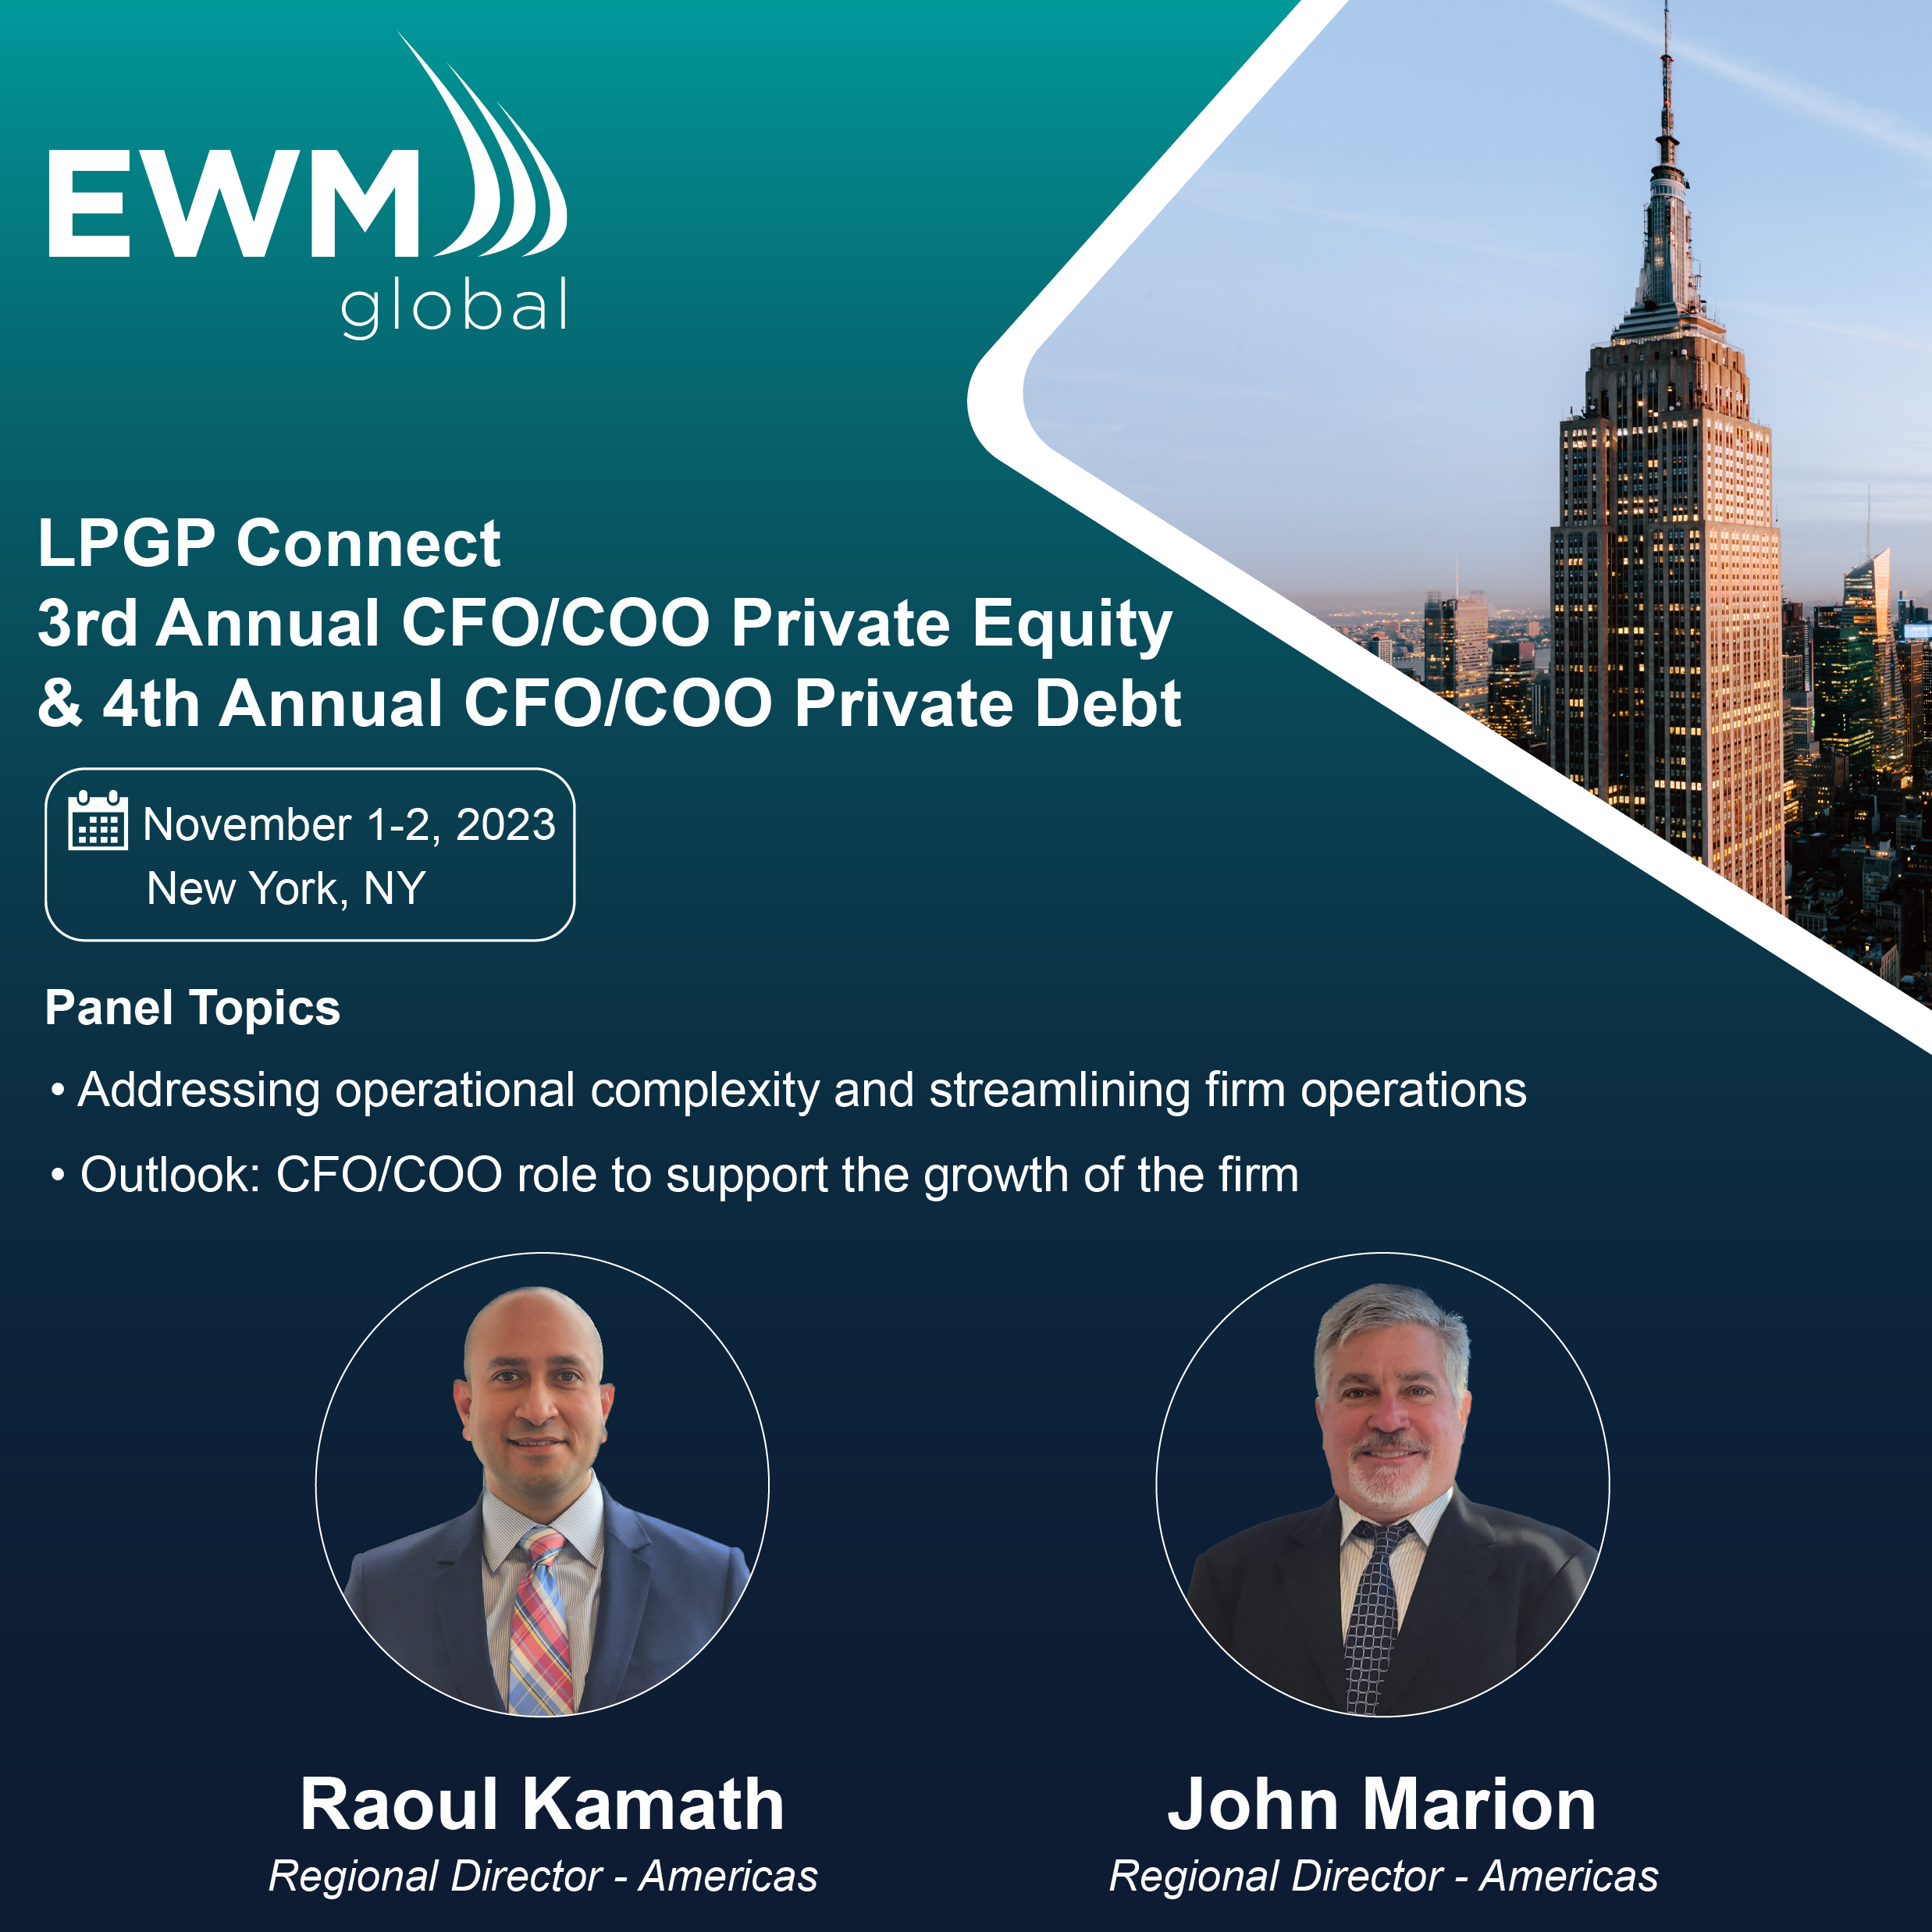 EWM Global to Sponsor LPGP Connect 3rd Annual CFO/COO Private Equity & 4th Annual CFO/COO Private Debt New York Conferences